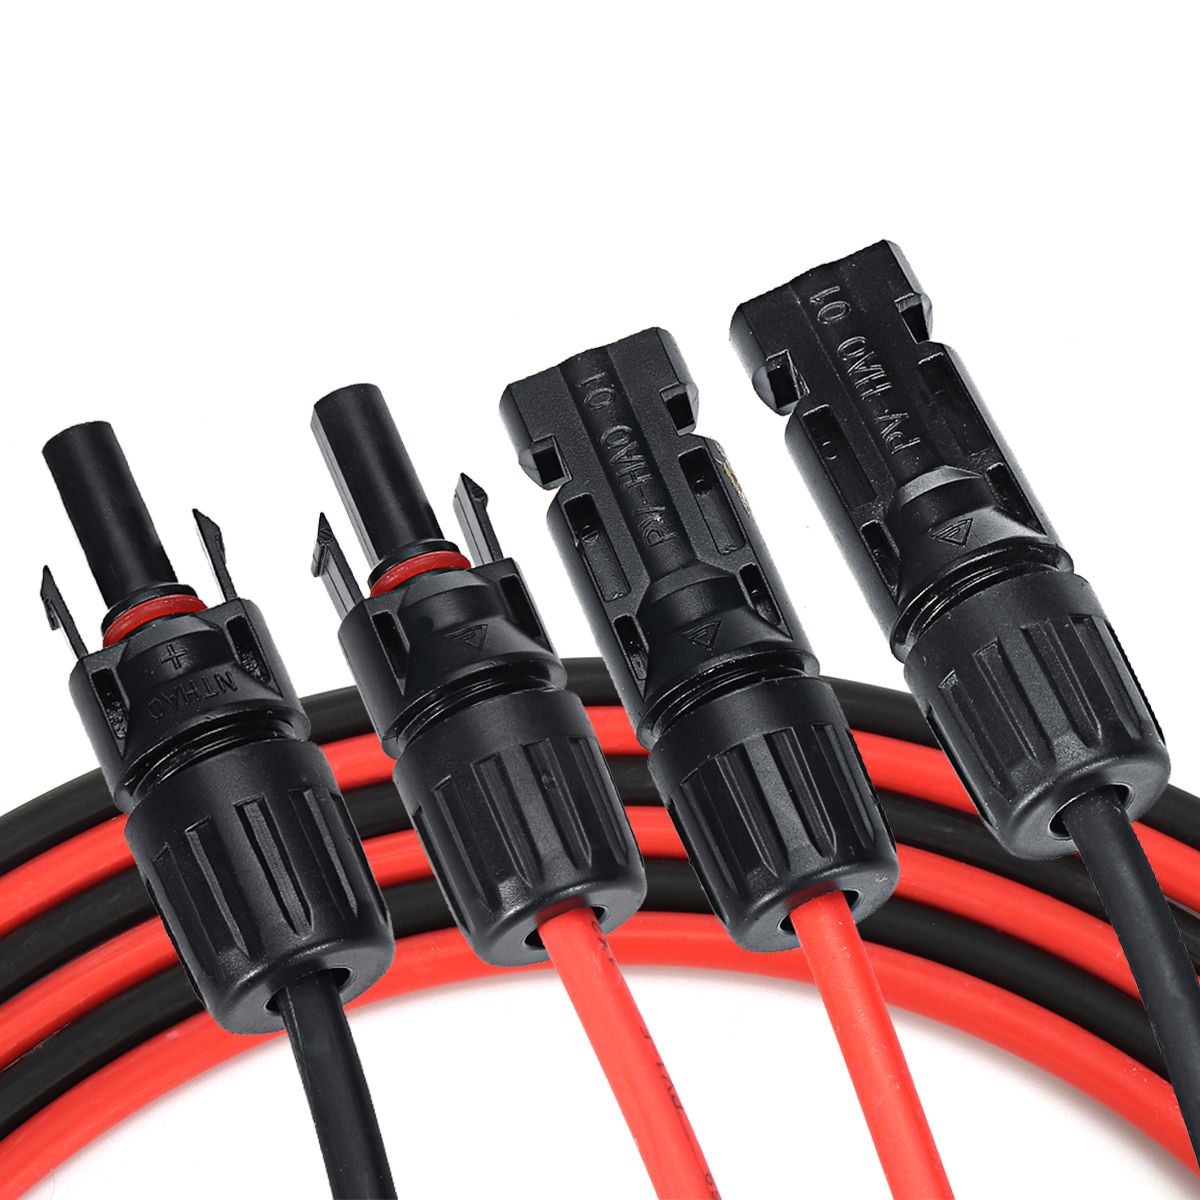 1-Pair-Black--Red-14-AWG-Solar-Panel-Extension-Cable-Wire-MC4-Connector-985m-1536425